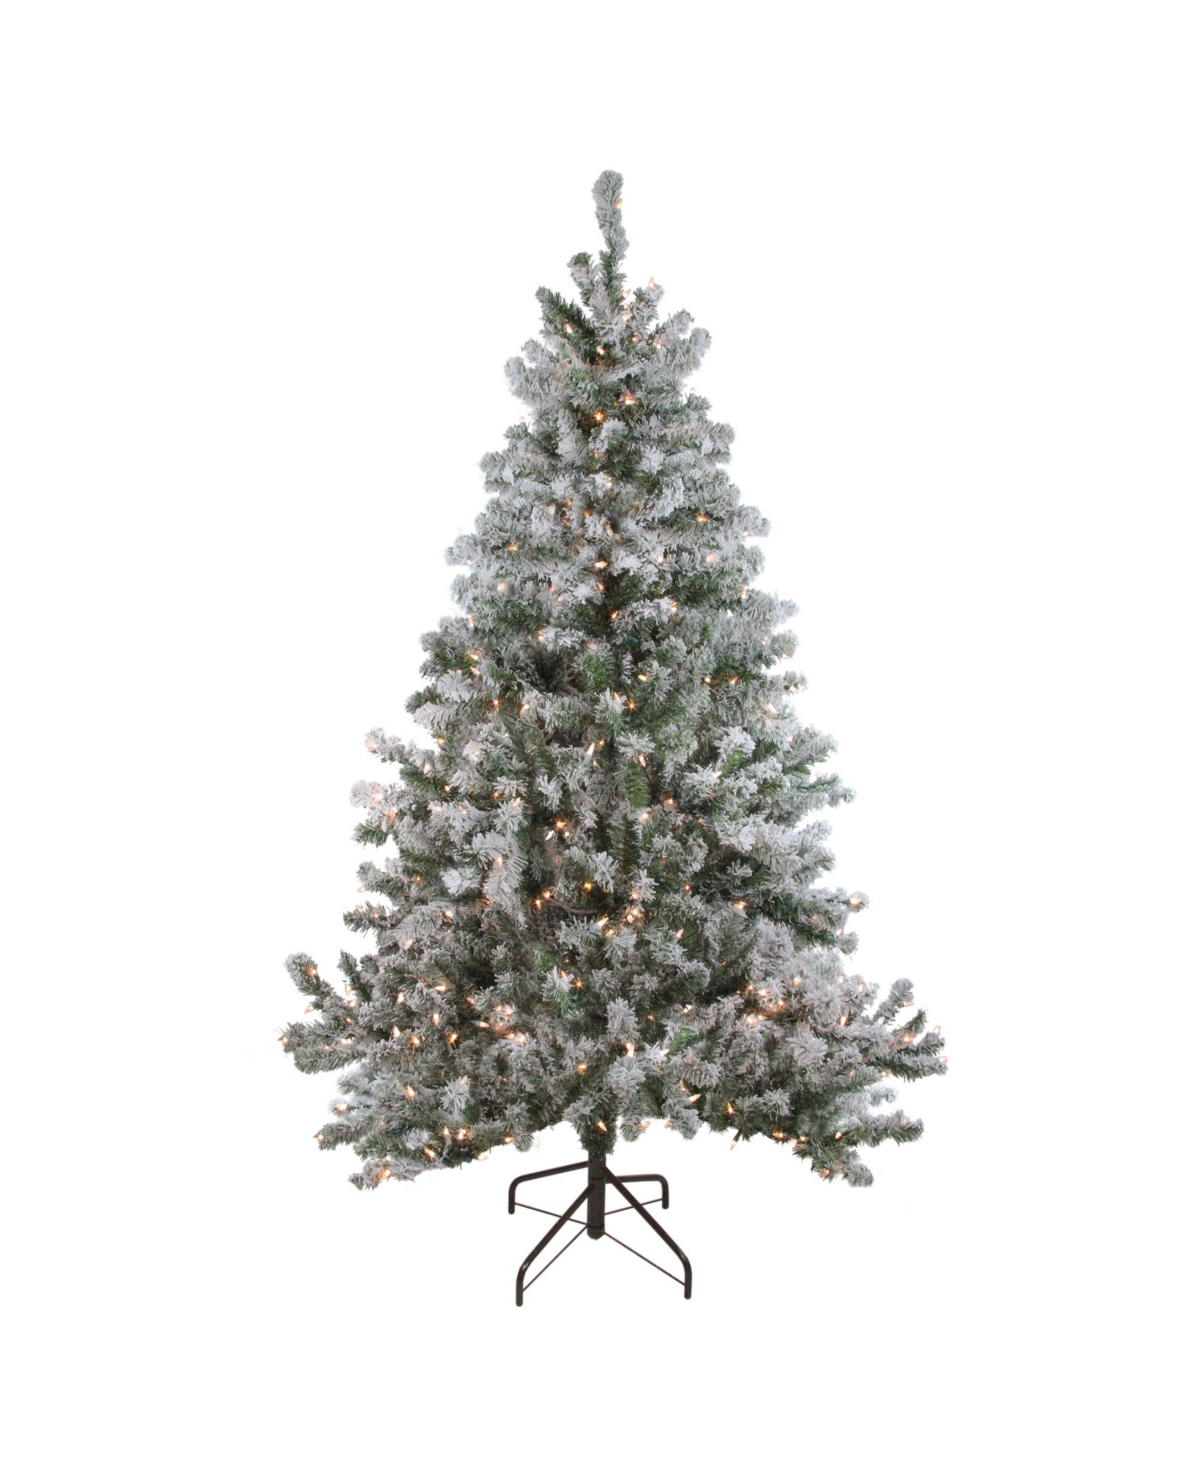 7' Pre-Lit Flocked Balsam Pine Artificial Christmas Tree - Clear Lights - Green